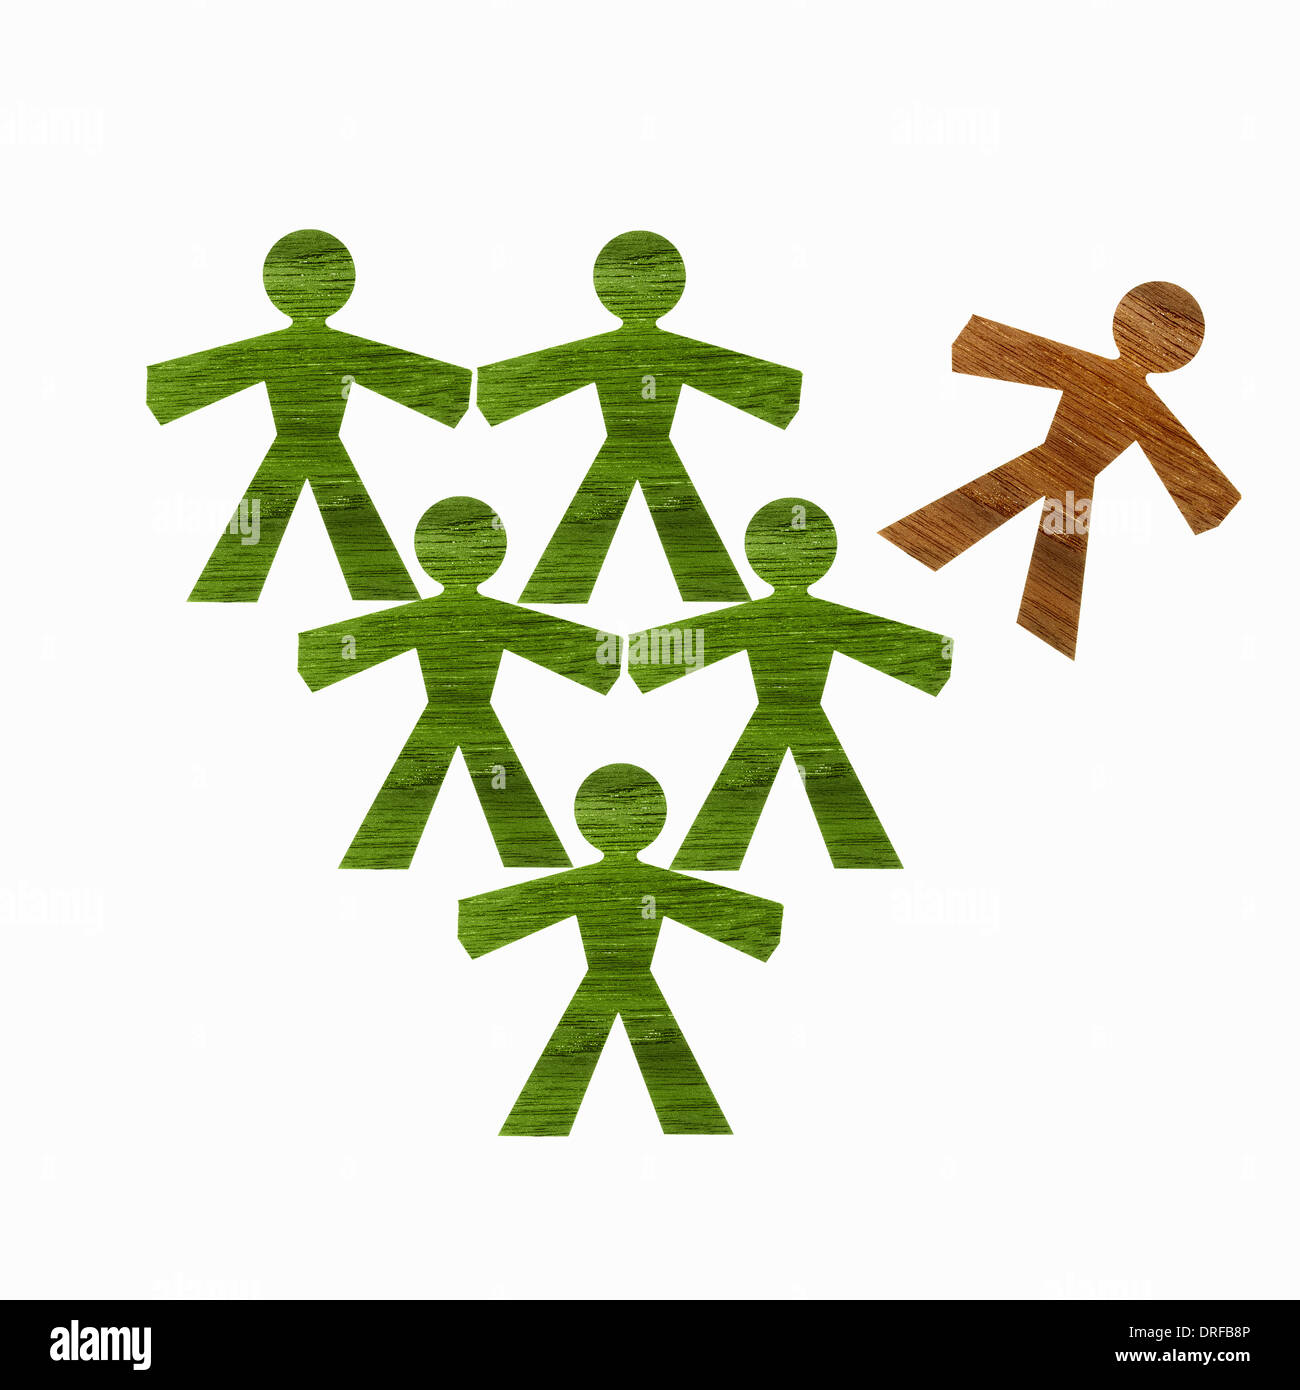 paper cut out representing people green one brown Stock Photo